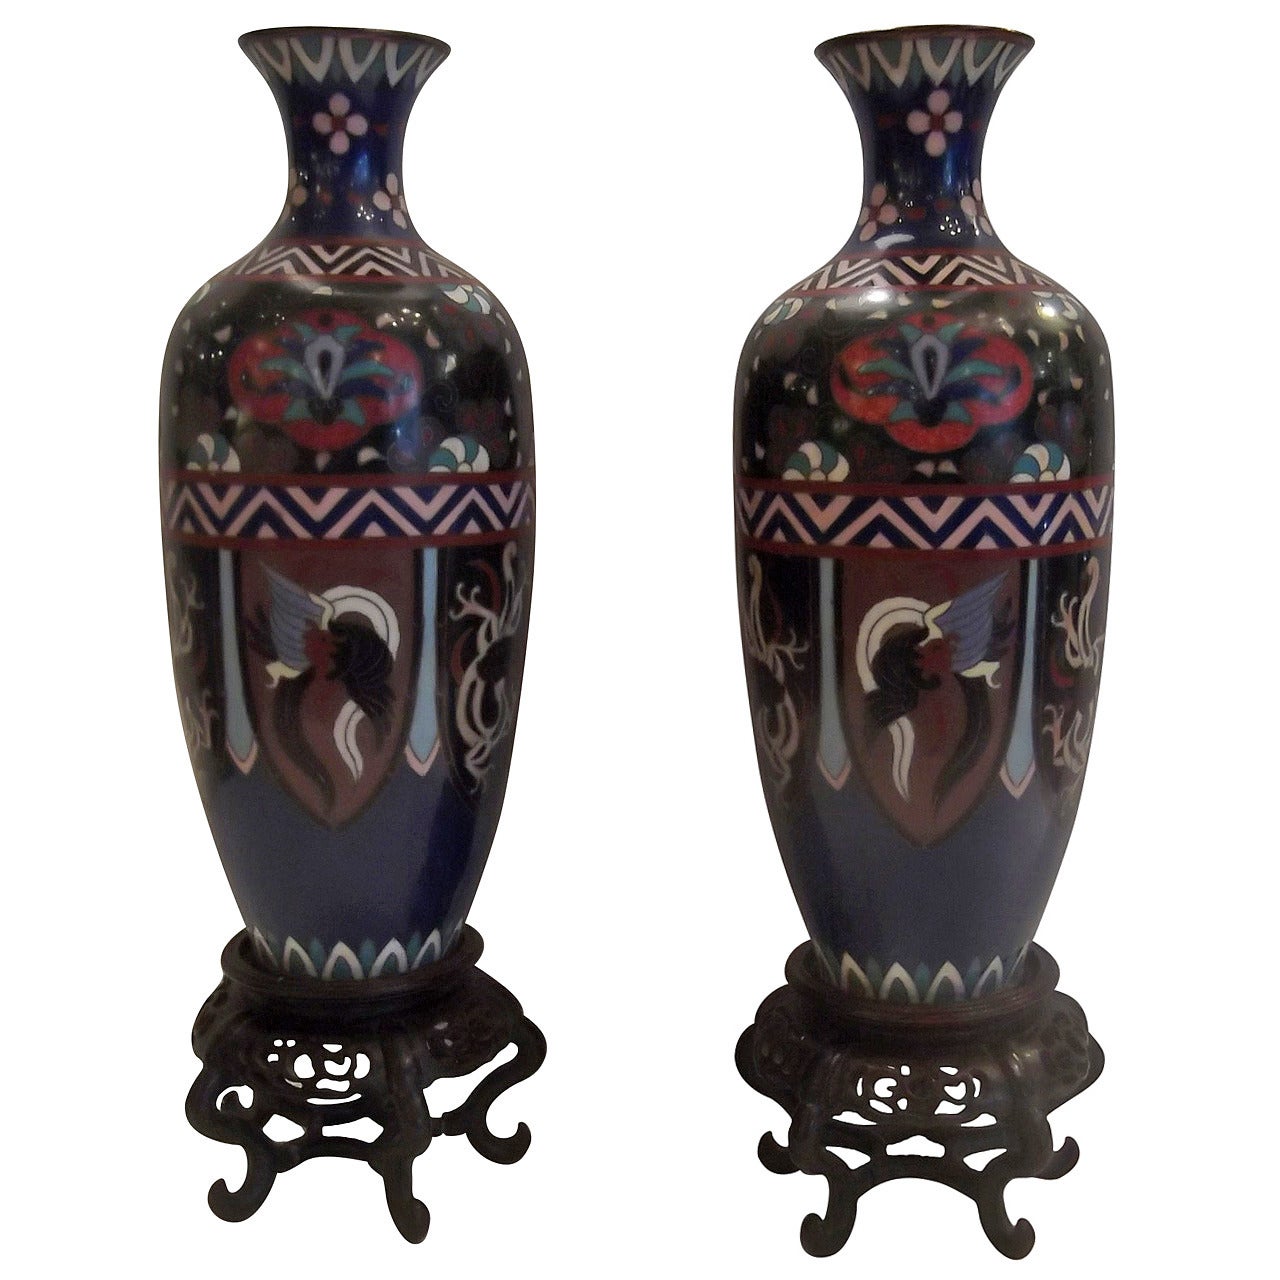 Pair of Meiji Period Japanese Cloisonne Vases with Rosewood Stands